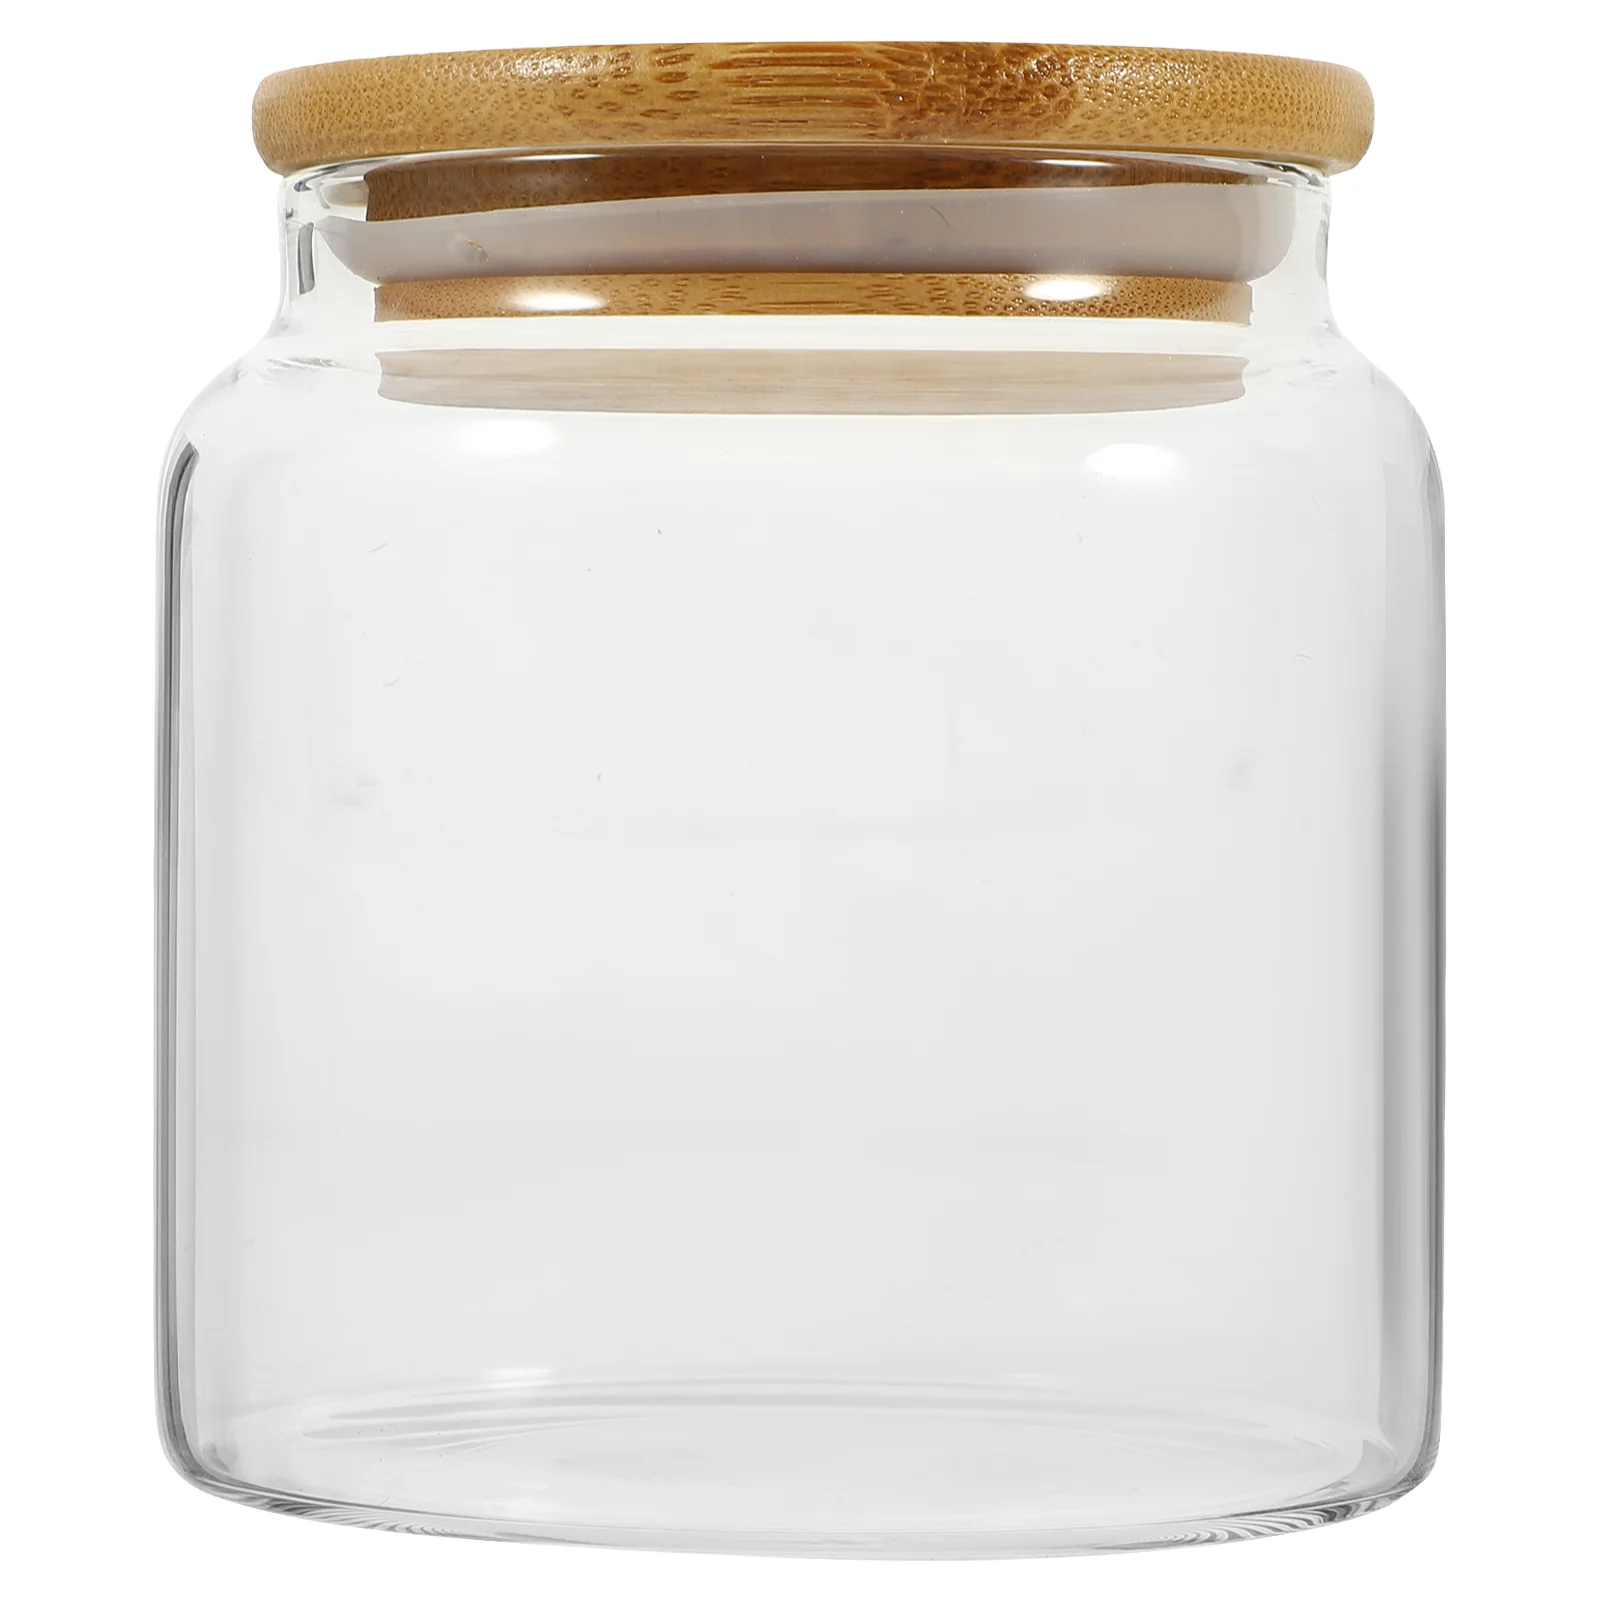 

Glass Storage Jar Airtight Large Containers Lids Food Bamboo Cereal Canisters Sets The Kitchen Pantry Jars